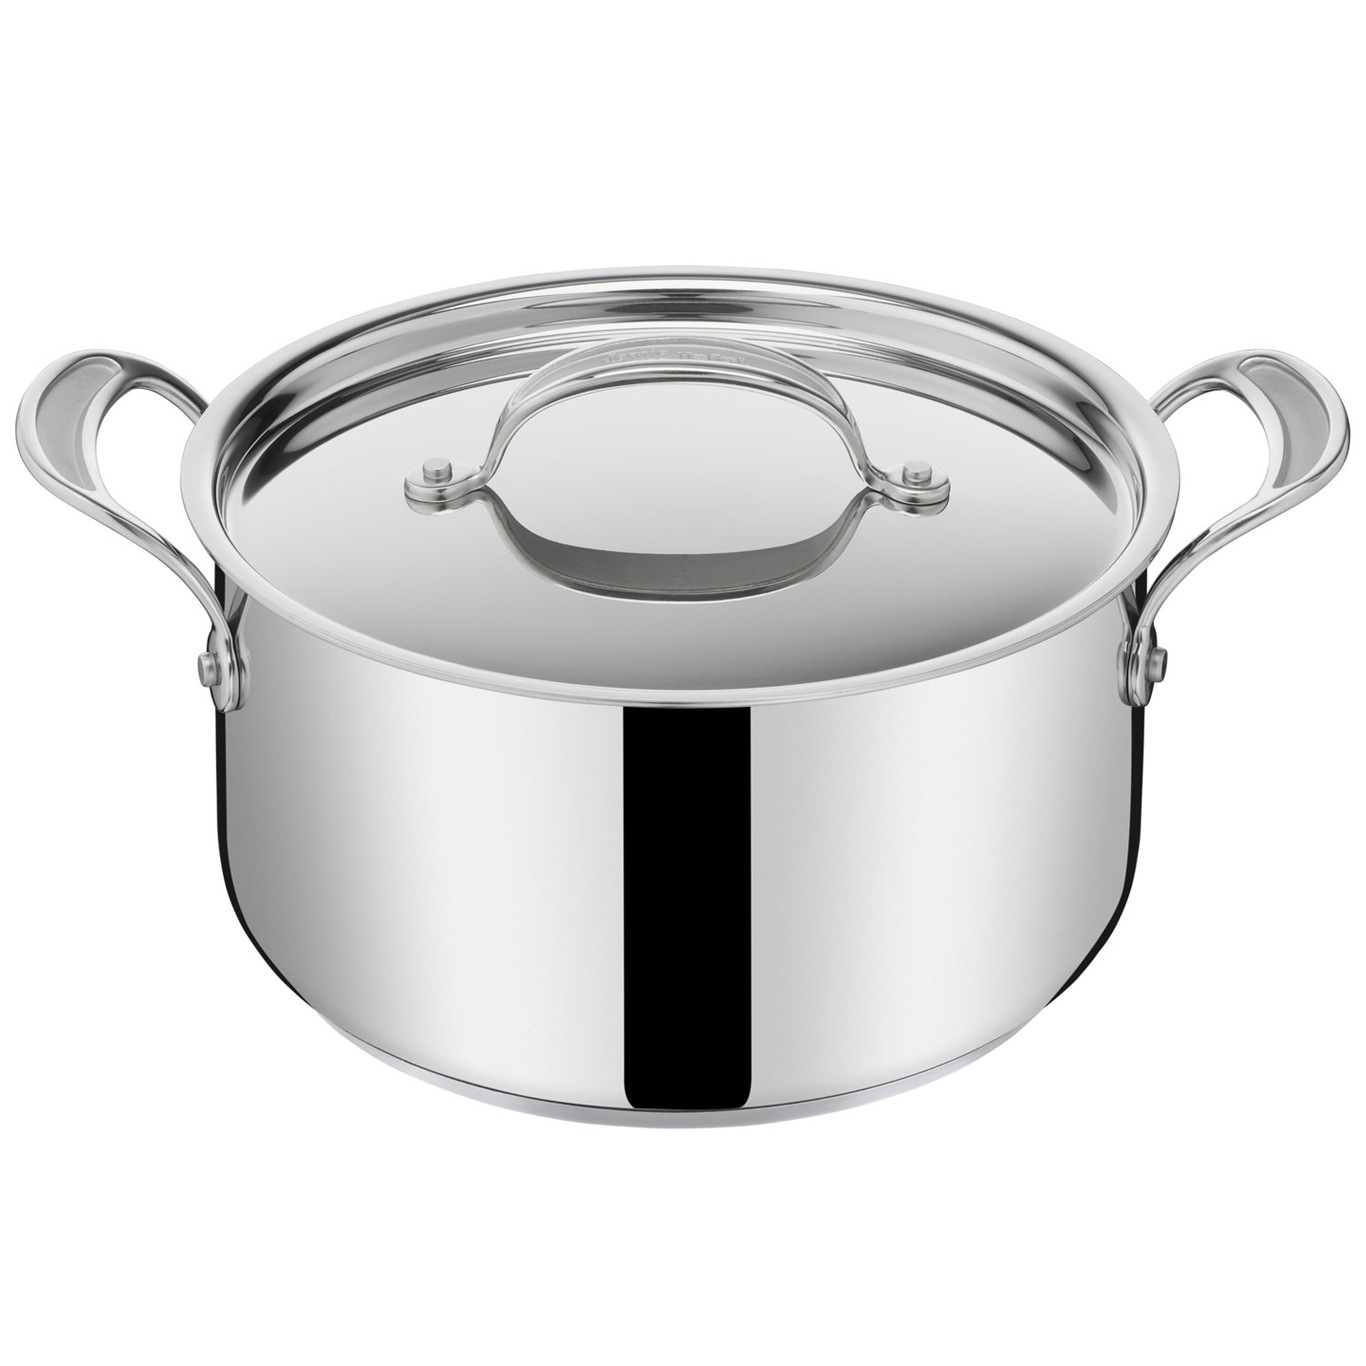 Jamie Oliver Cook's Classic Pot Roestvrij Staal, 24 cm / 5,2 L